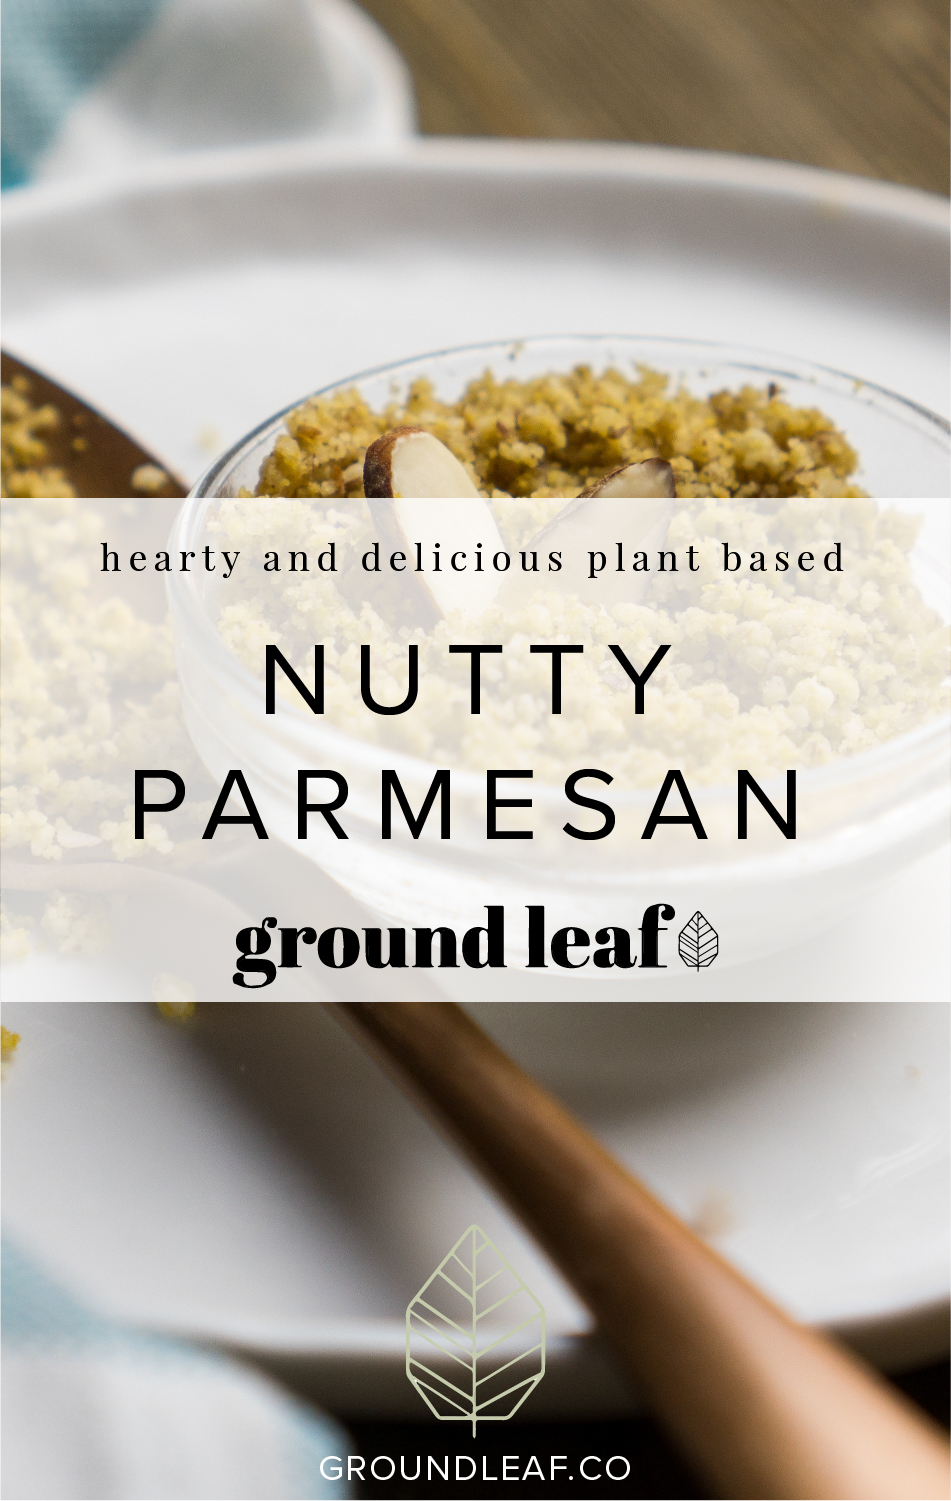 Nutty Parmesan is a perfect plant based option for achieving that wonderful cheesy flavor over pastas, veggies, soups, and more! If you have a nut allergy be sure to check out the Seedy version on groundleaf.co